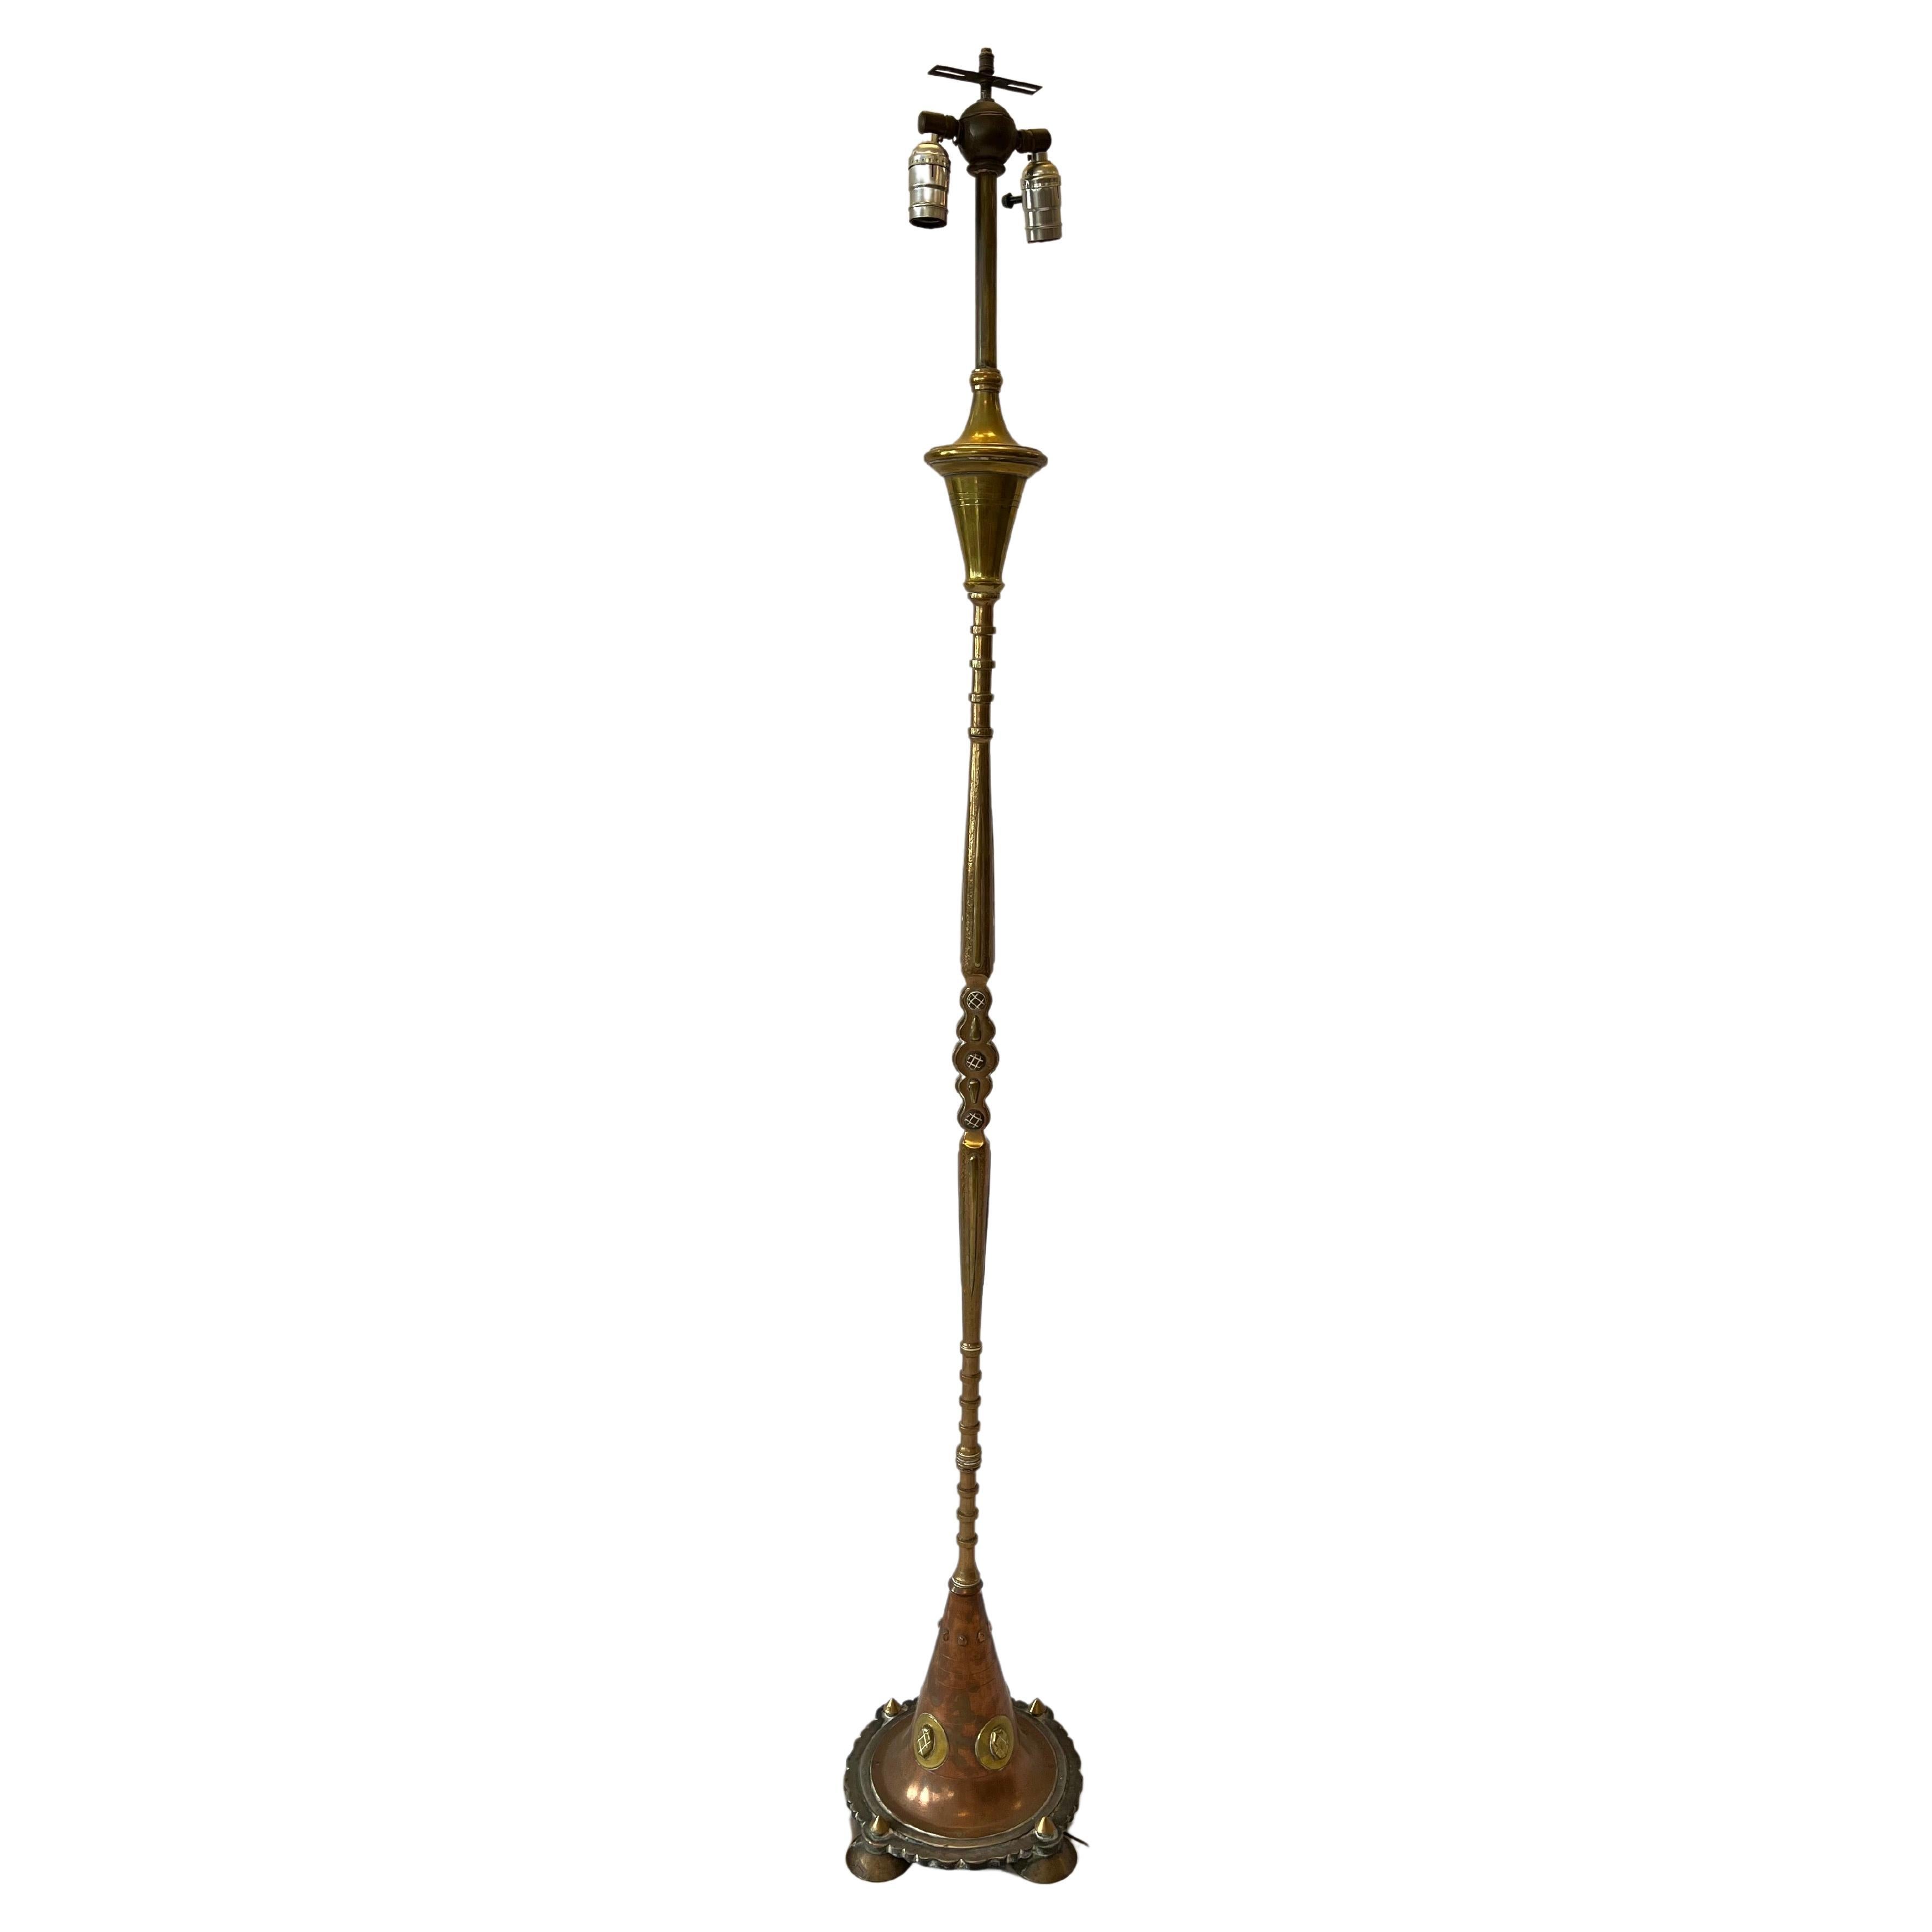 Antique Copper Brass Mixed Metal Ornate Moorish Style Hand Crafted Floor Lamp